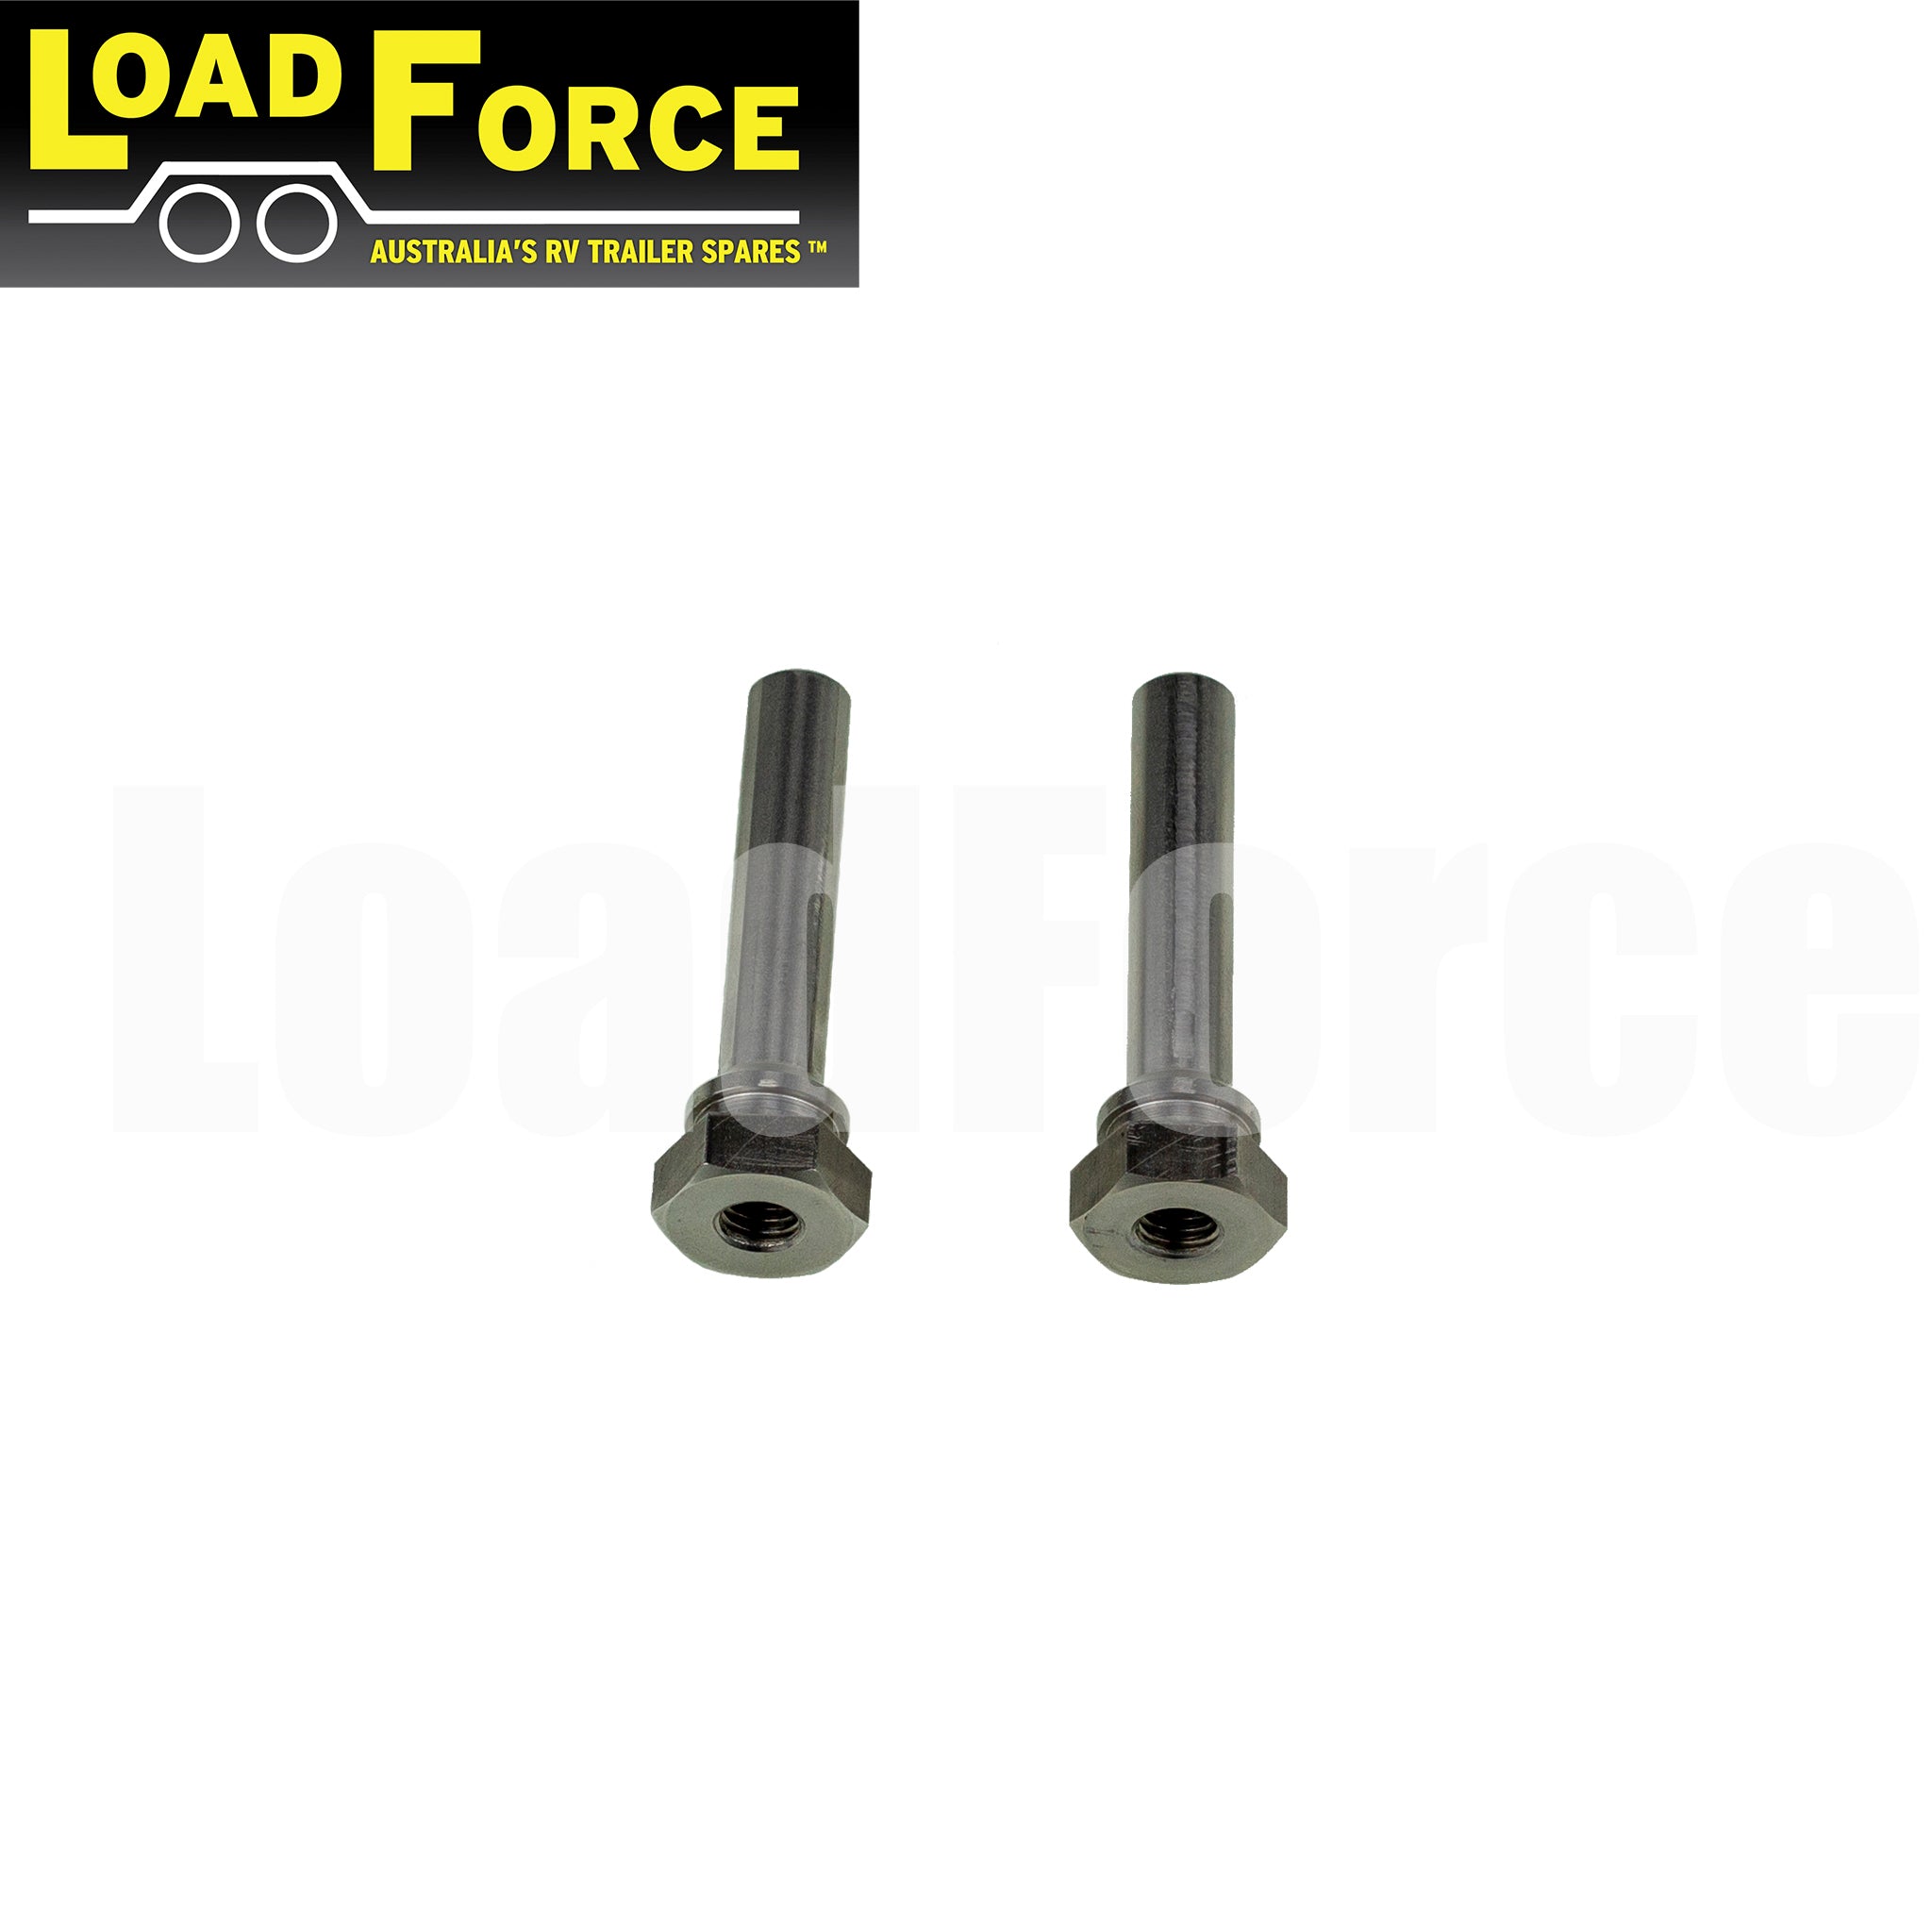 Slide pins stainless steel 1 pair for LoadForce T2 and PBR calipers